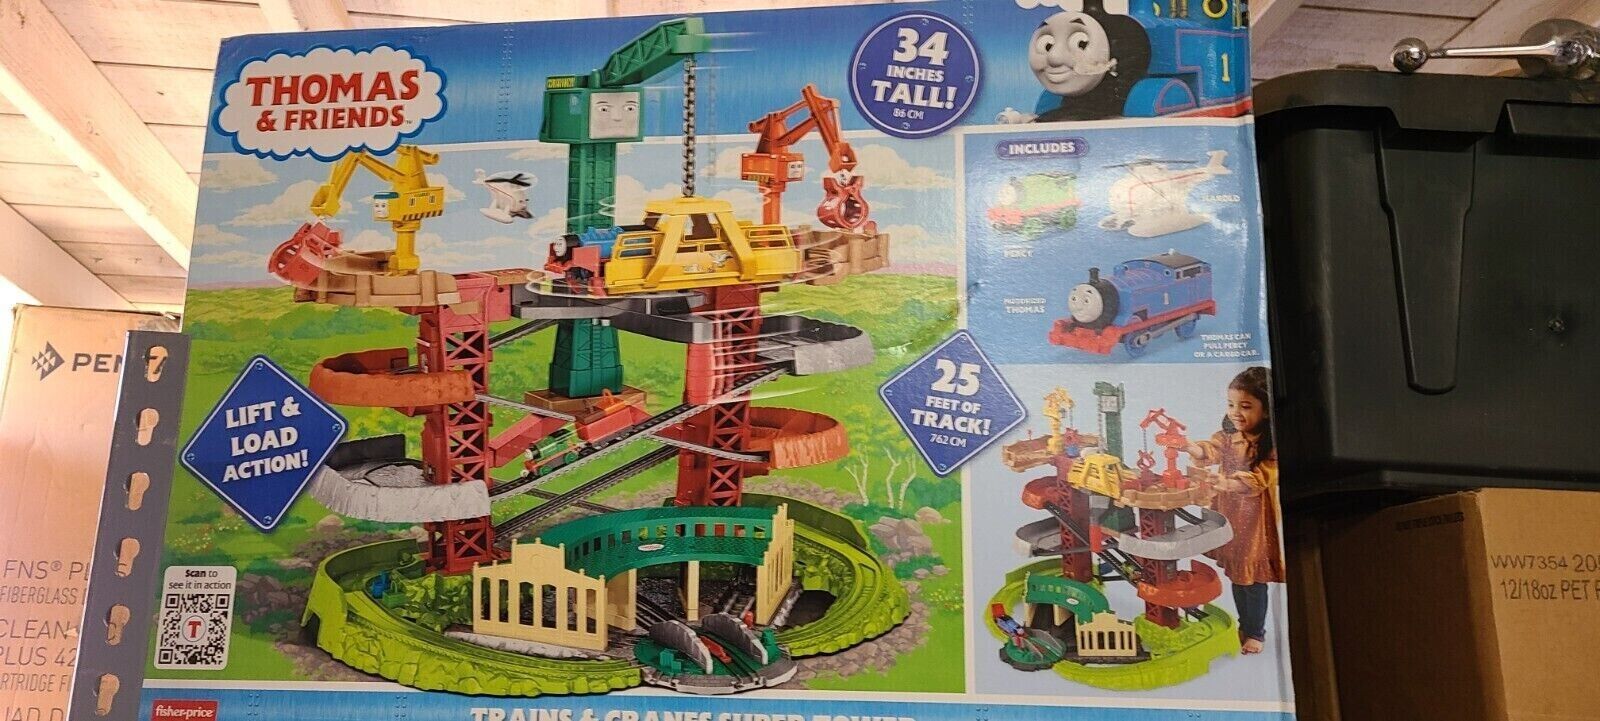 Thomas and friends full steam ahead, fun with friends track 